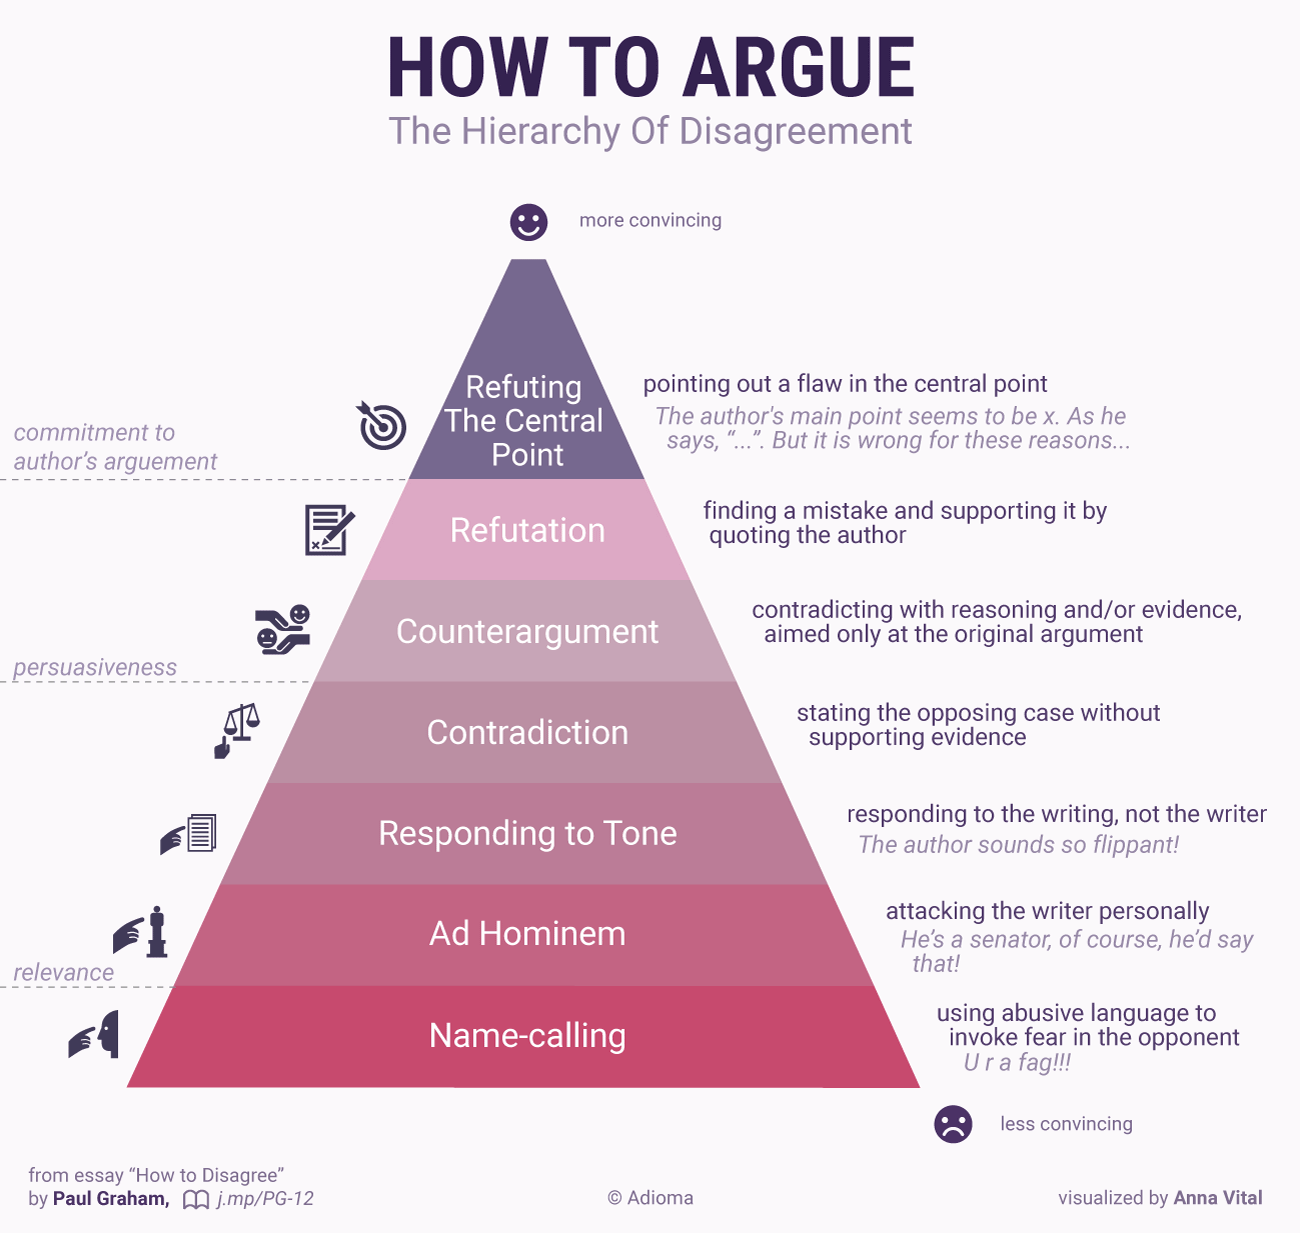 How To Argue - The Hierarchy of Disagreement - Adioma